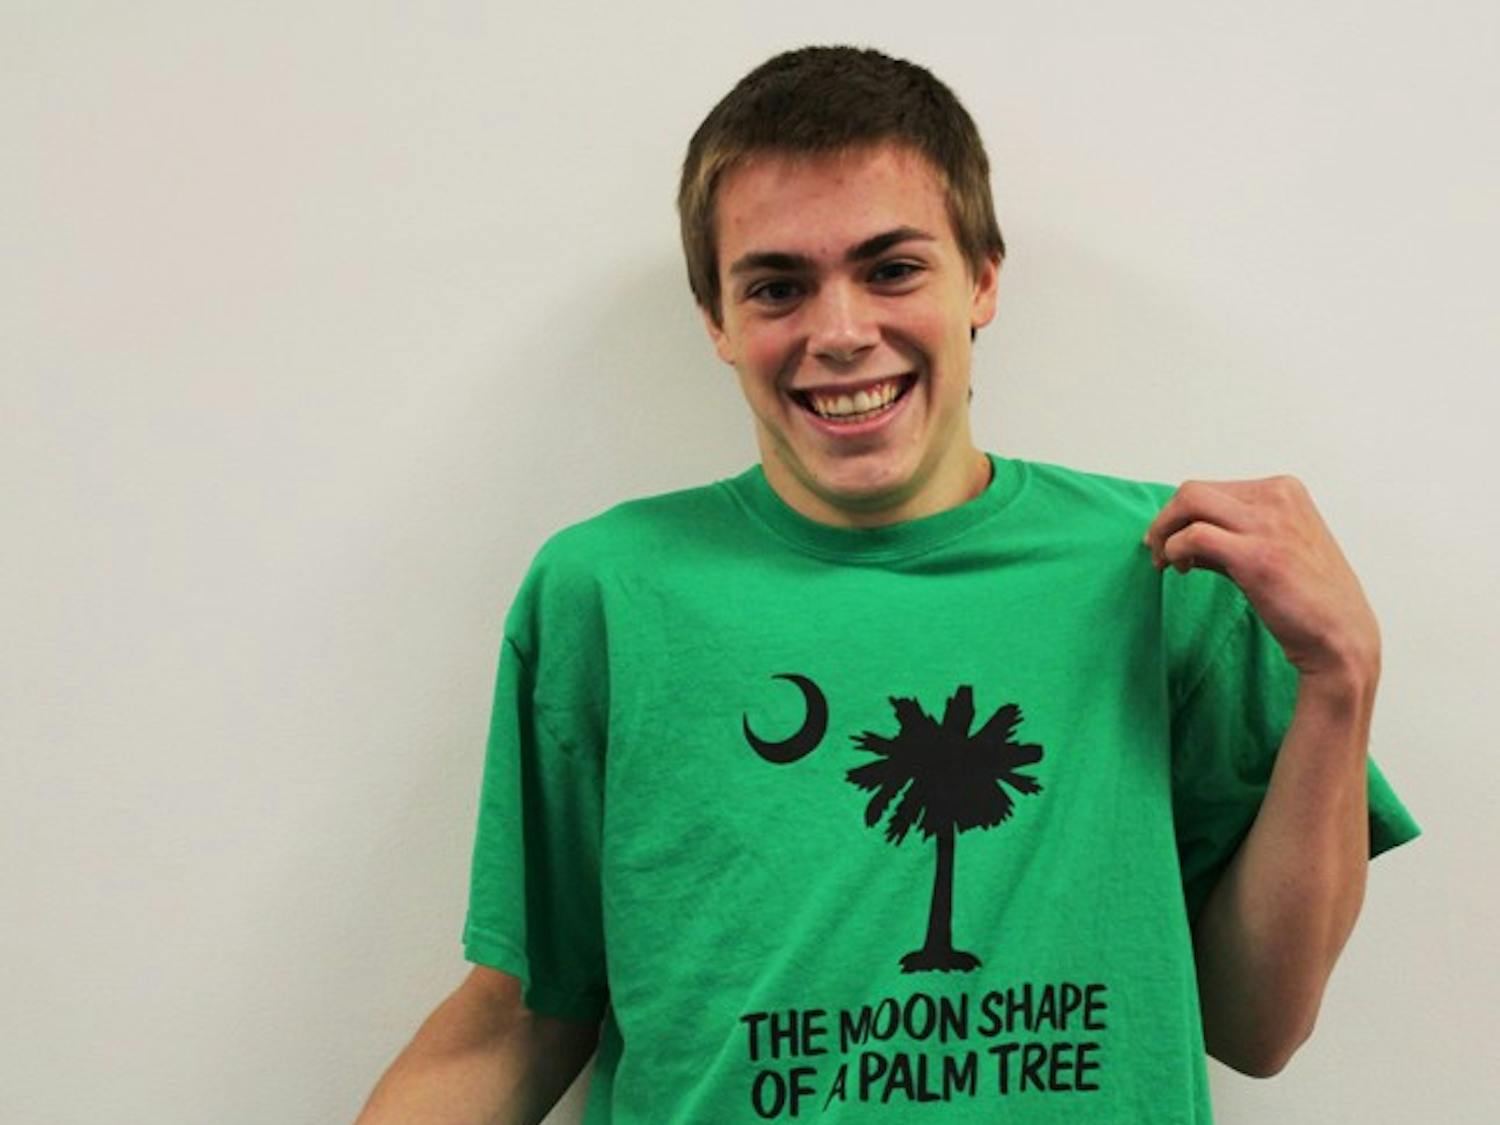 Sophomore David Hill participated on Wheel of Fortune. His mom made him this humorous shirt after he accidentally answered a puzzle as "the moon shape of a palm tree" instead of "the cool shade of a palm tree."